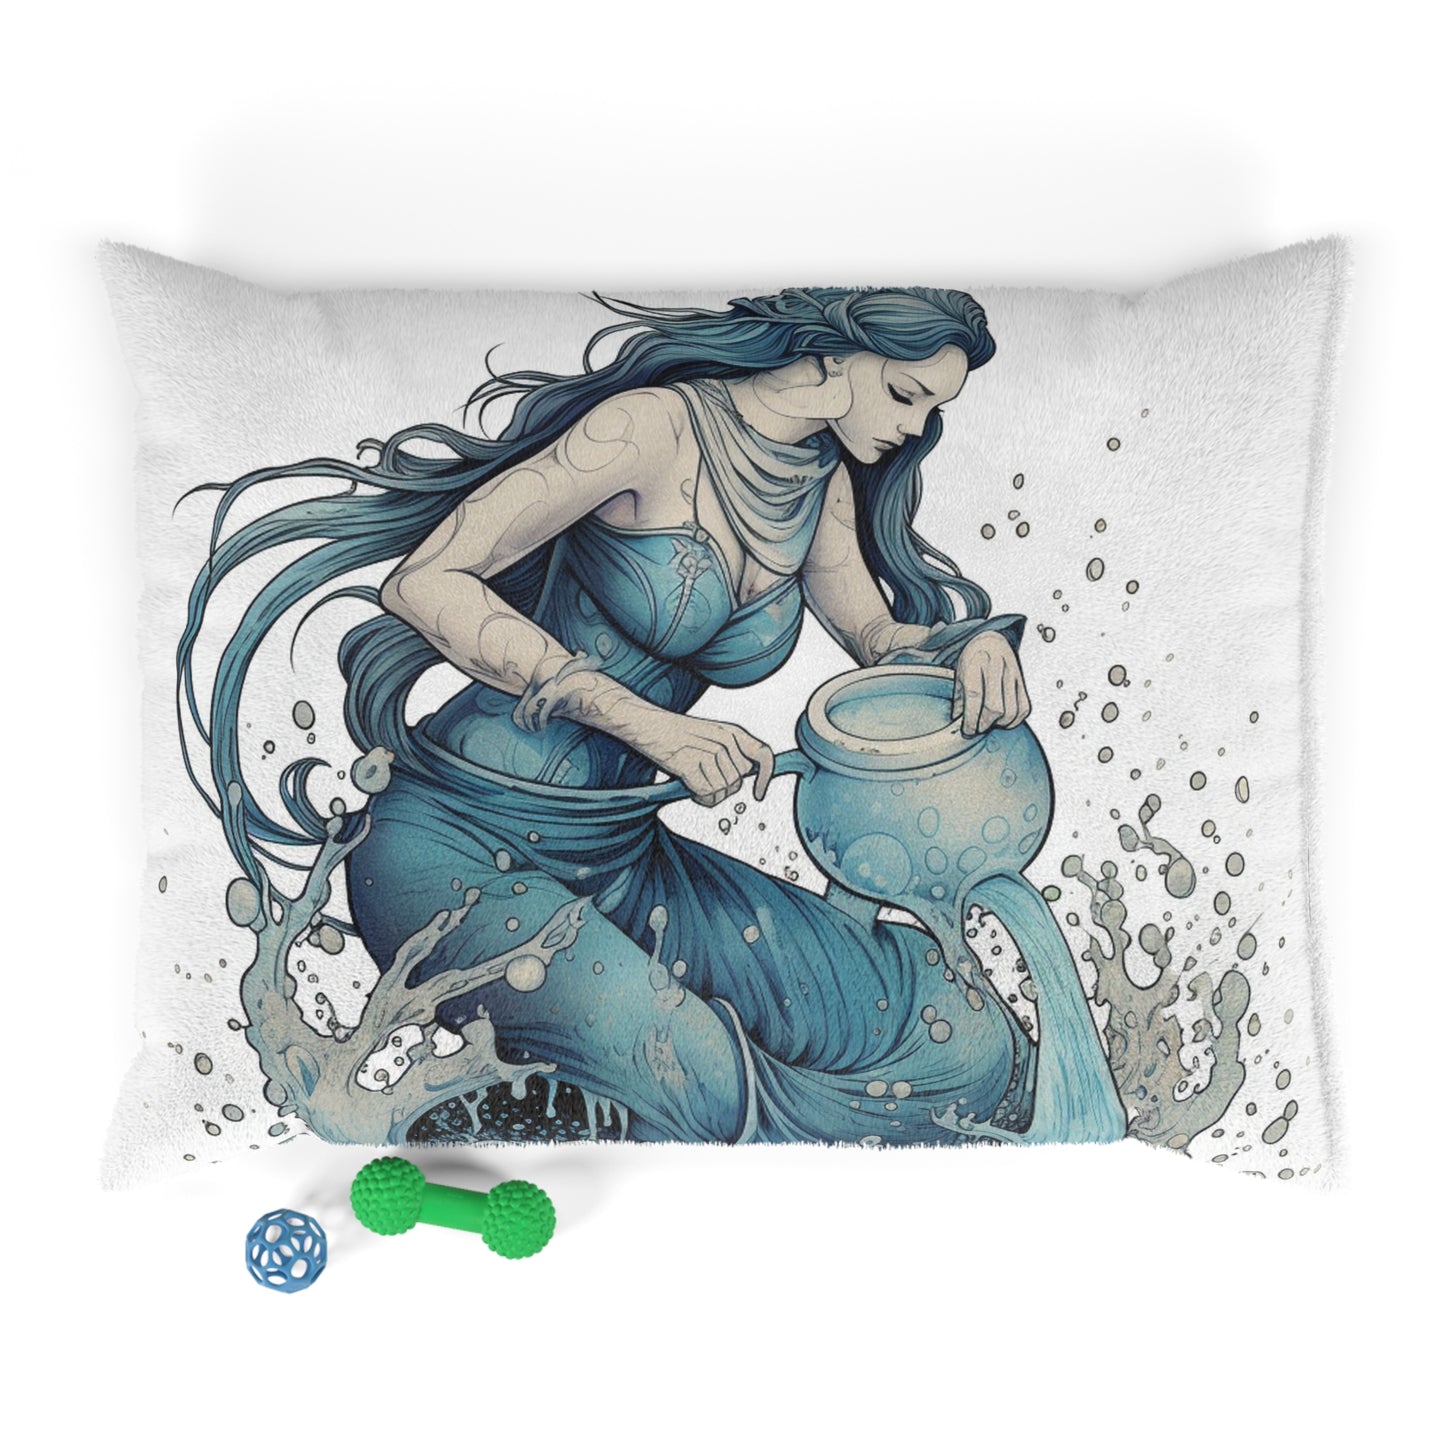 Aquarius Zodiac Symbol - Girl Pouring Water, Hand-Drawn Style - Pet Bed